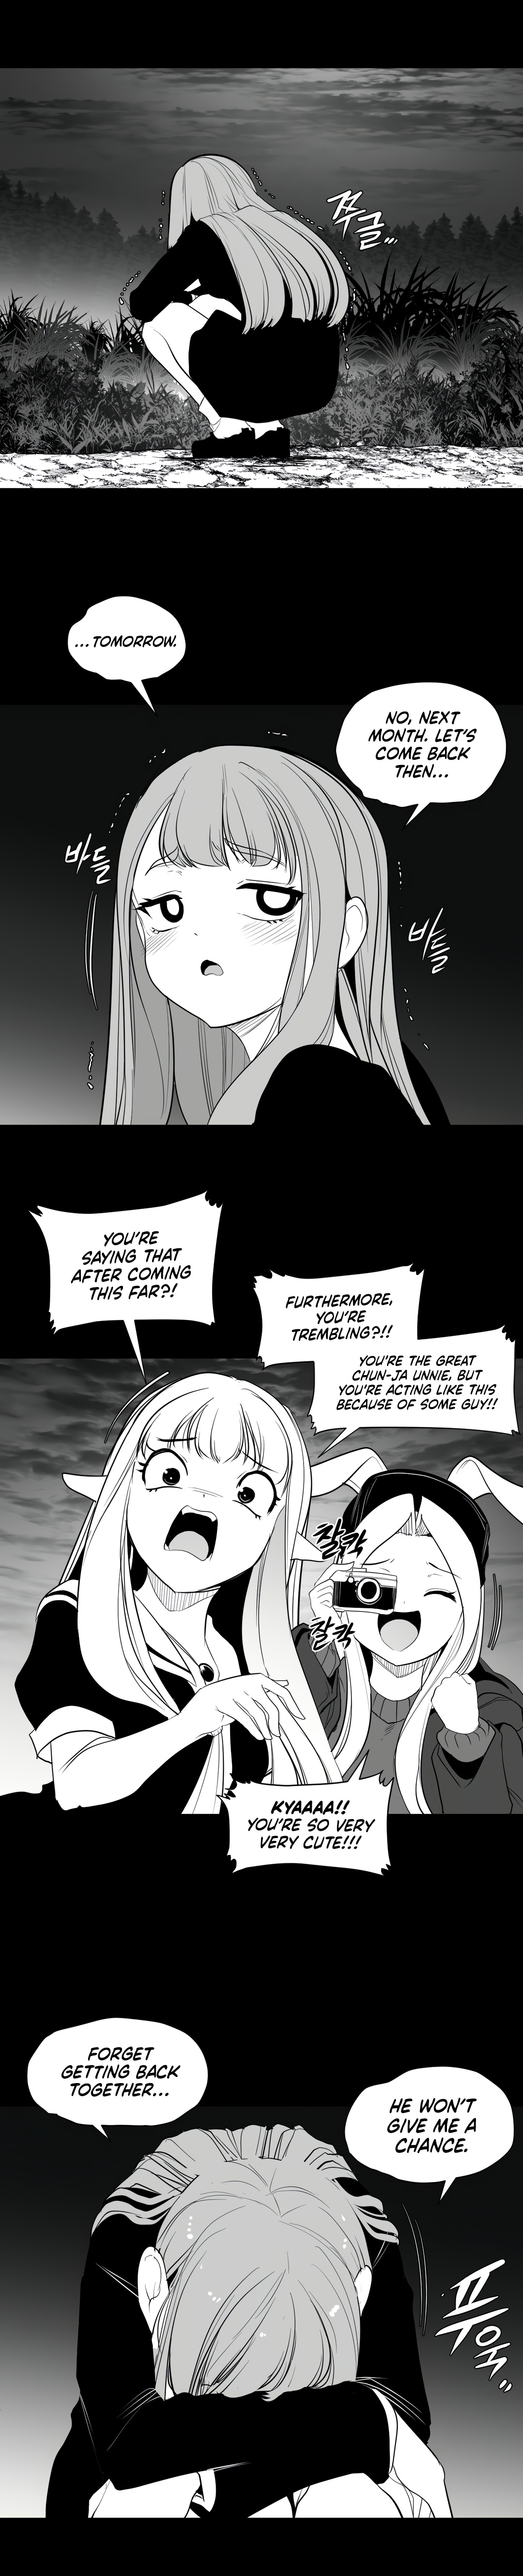 What Happens Inside The Dungeon Chapter 118: Side Story - Chapter 8 - Picture 3